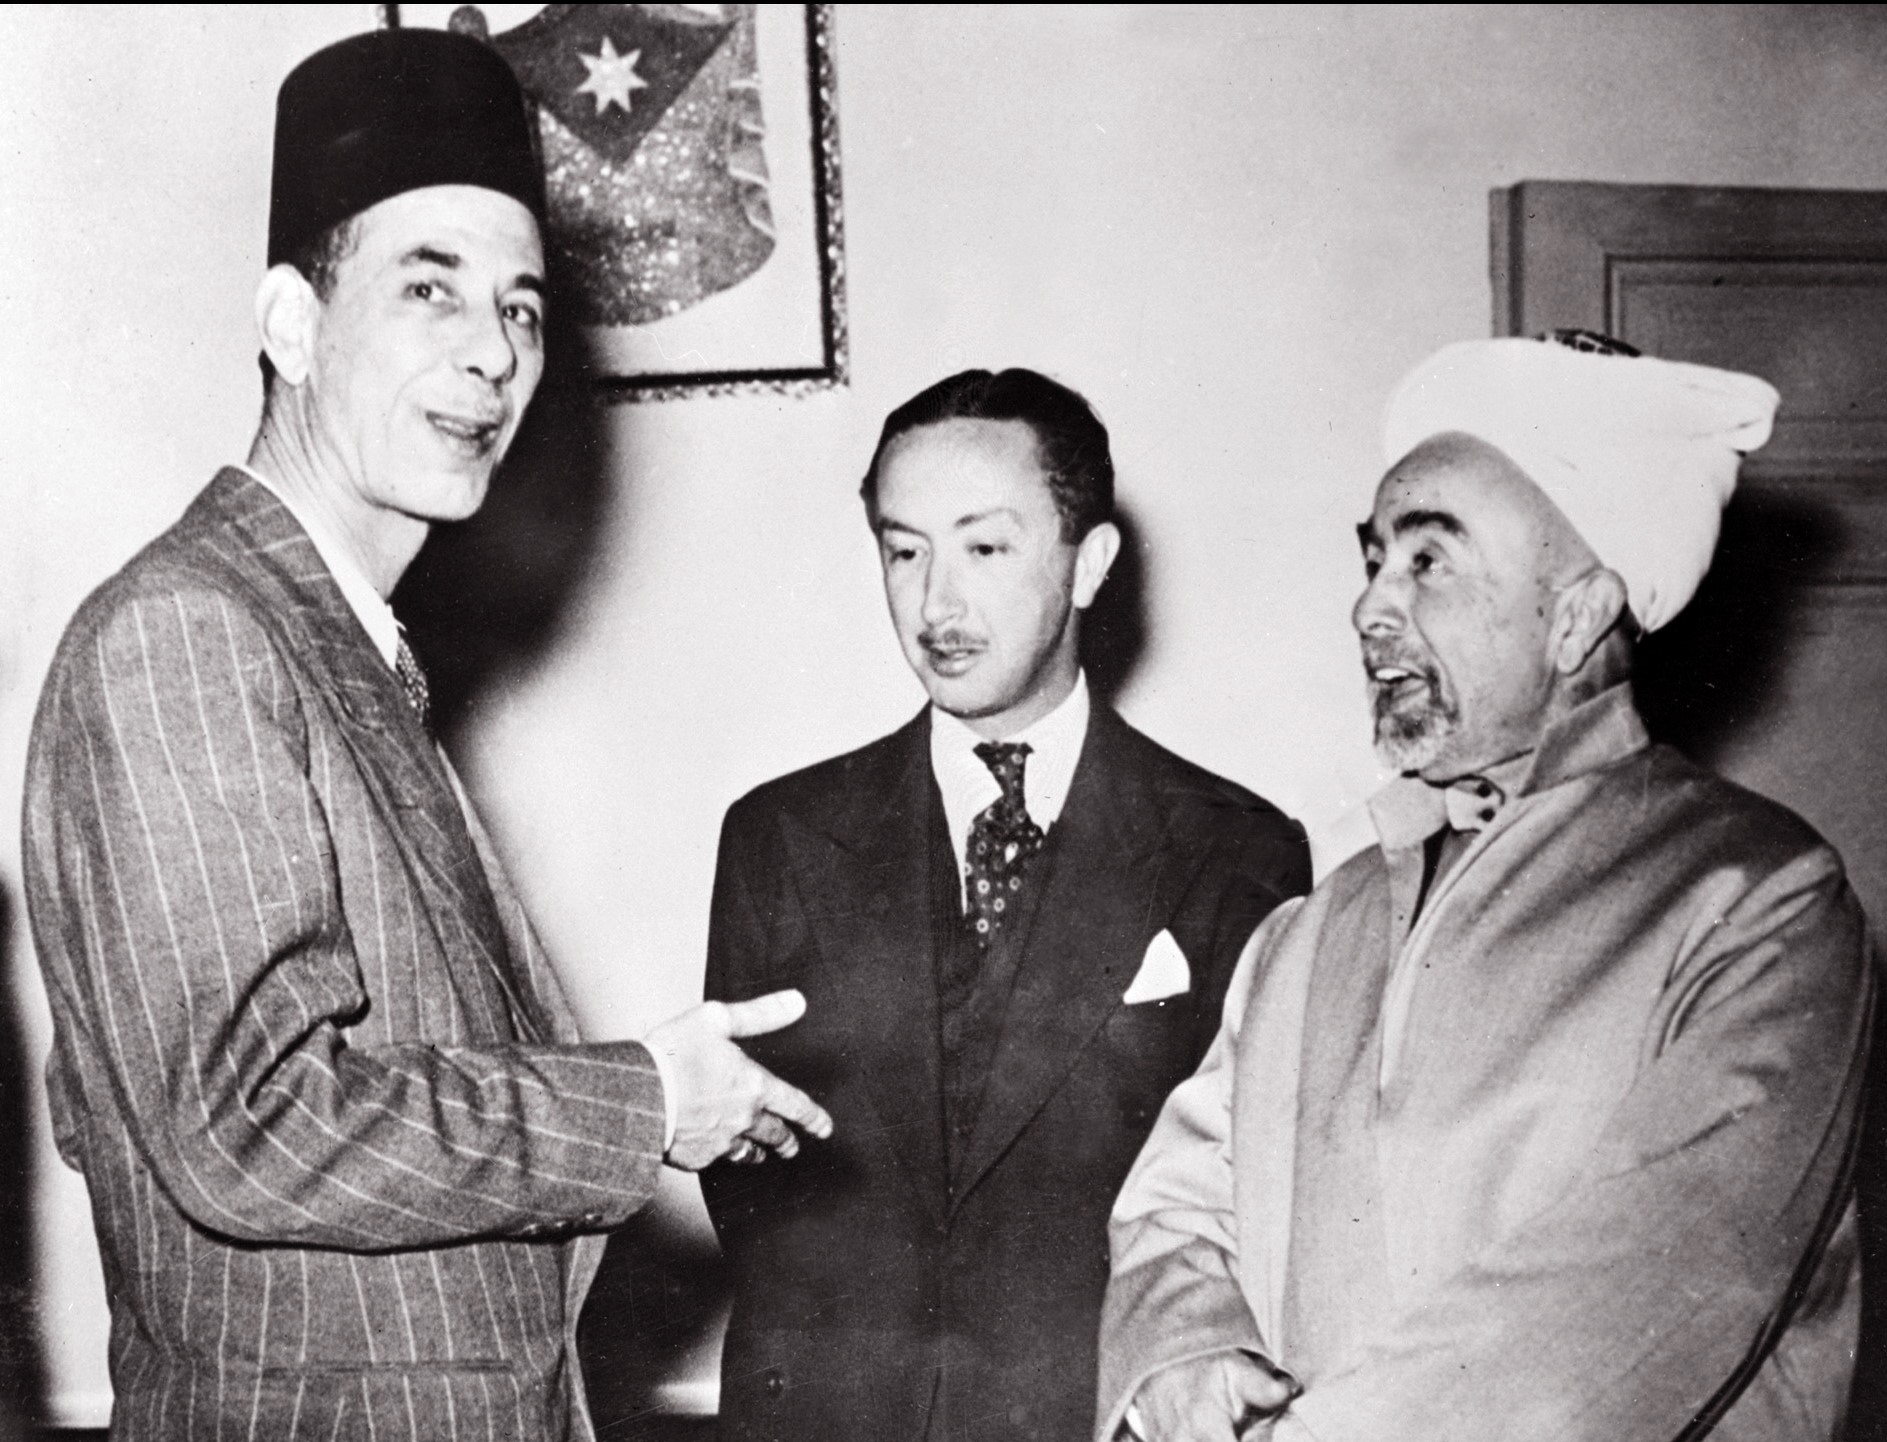 King Abdullah (r) of Transjordan (later Jordan), Commandant of the Allied Arab forces, talks 13 May 1948 in Amman with Abed al-Rahman Azzam (l), the secretary general of the Arab League and Abd al-Elah Ibn Ali, the Prince Regent of Iraq, the day before the beginning of the first Arab-Israeli War. 